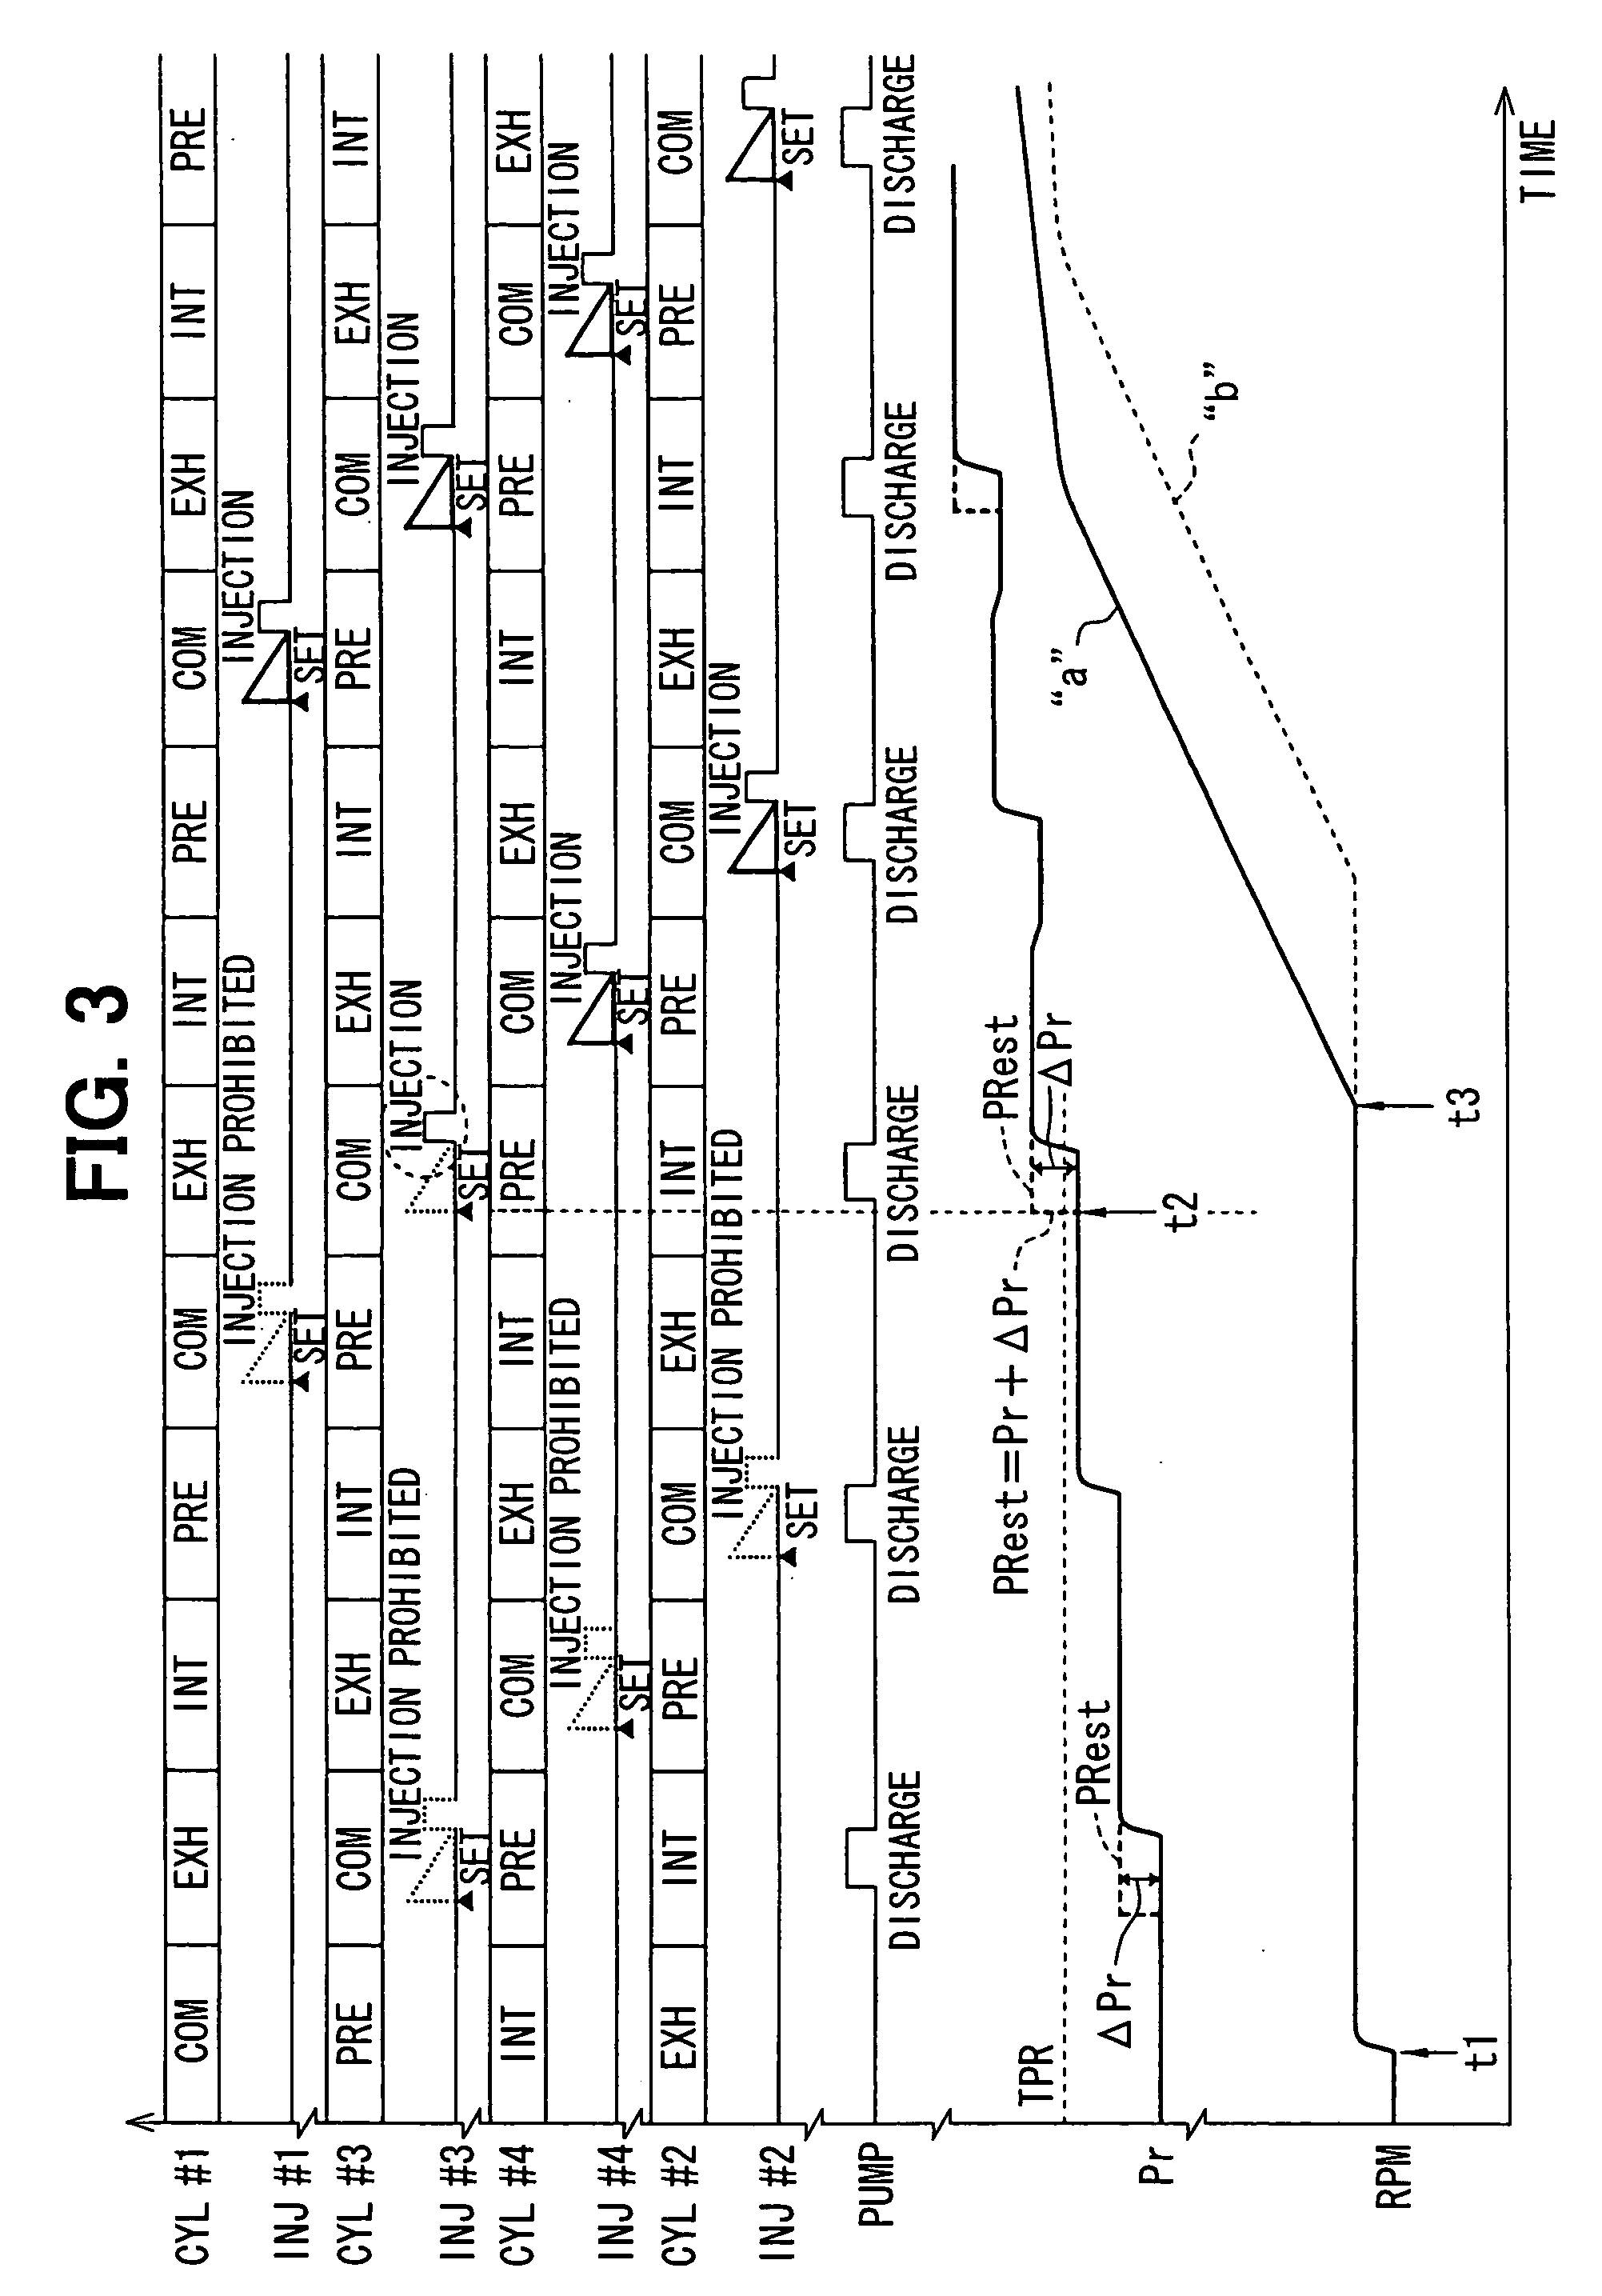 Startup controller for in-cylinder injection internal combustion engine